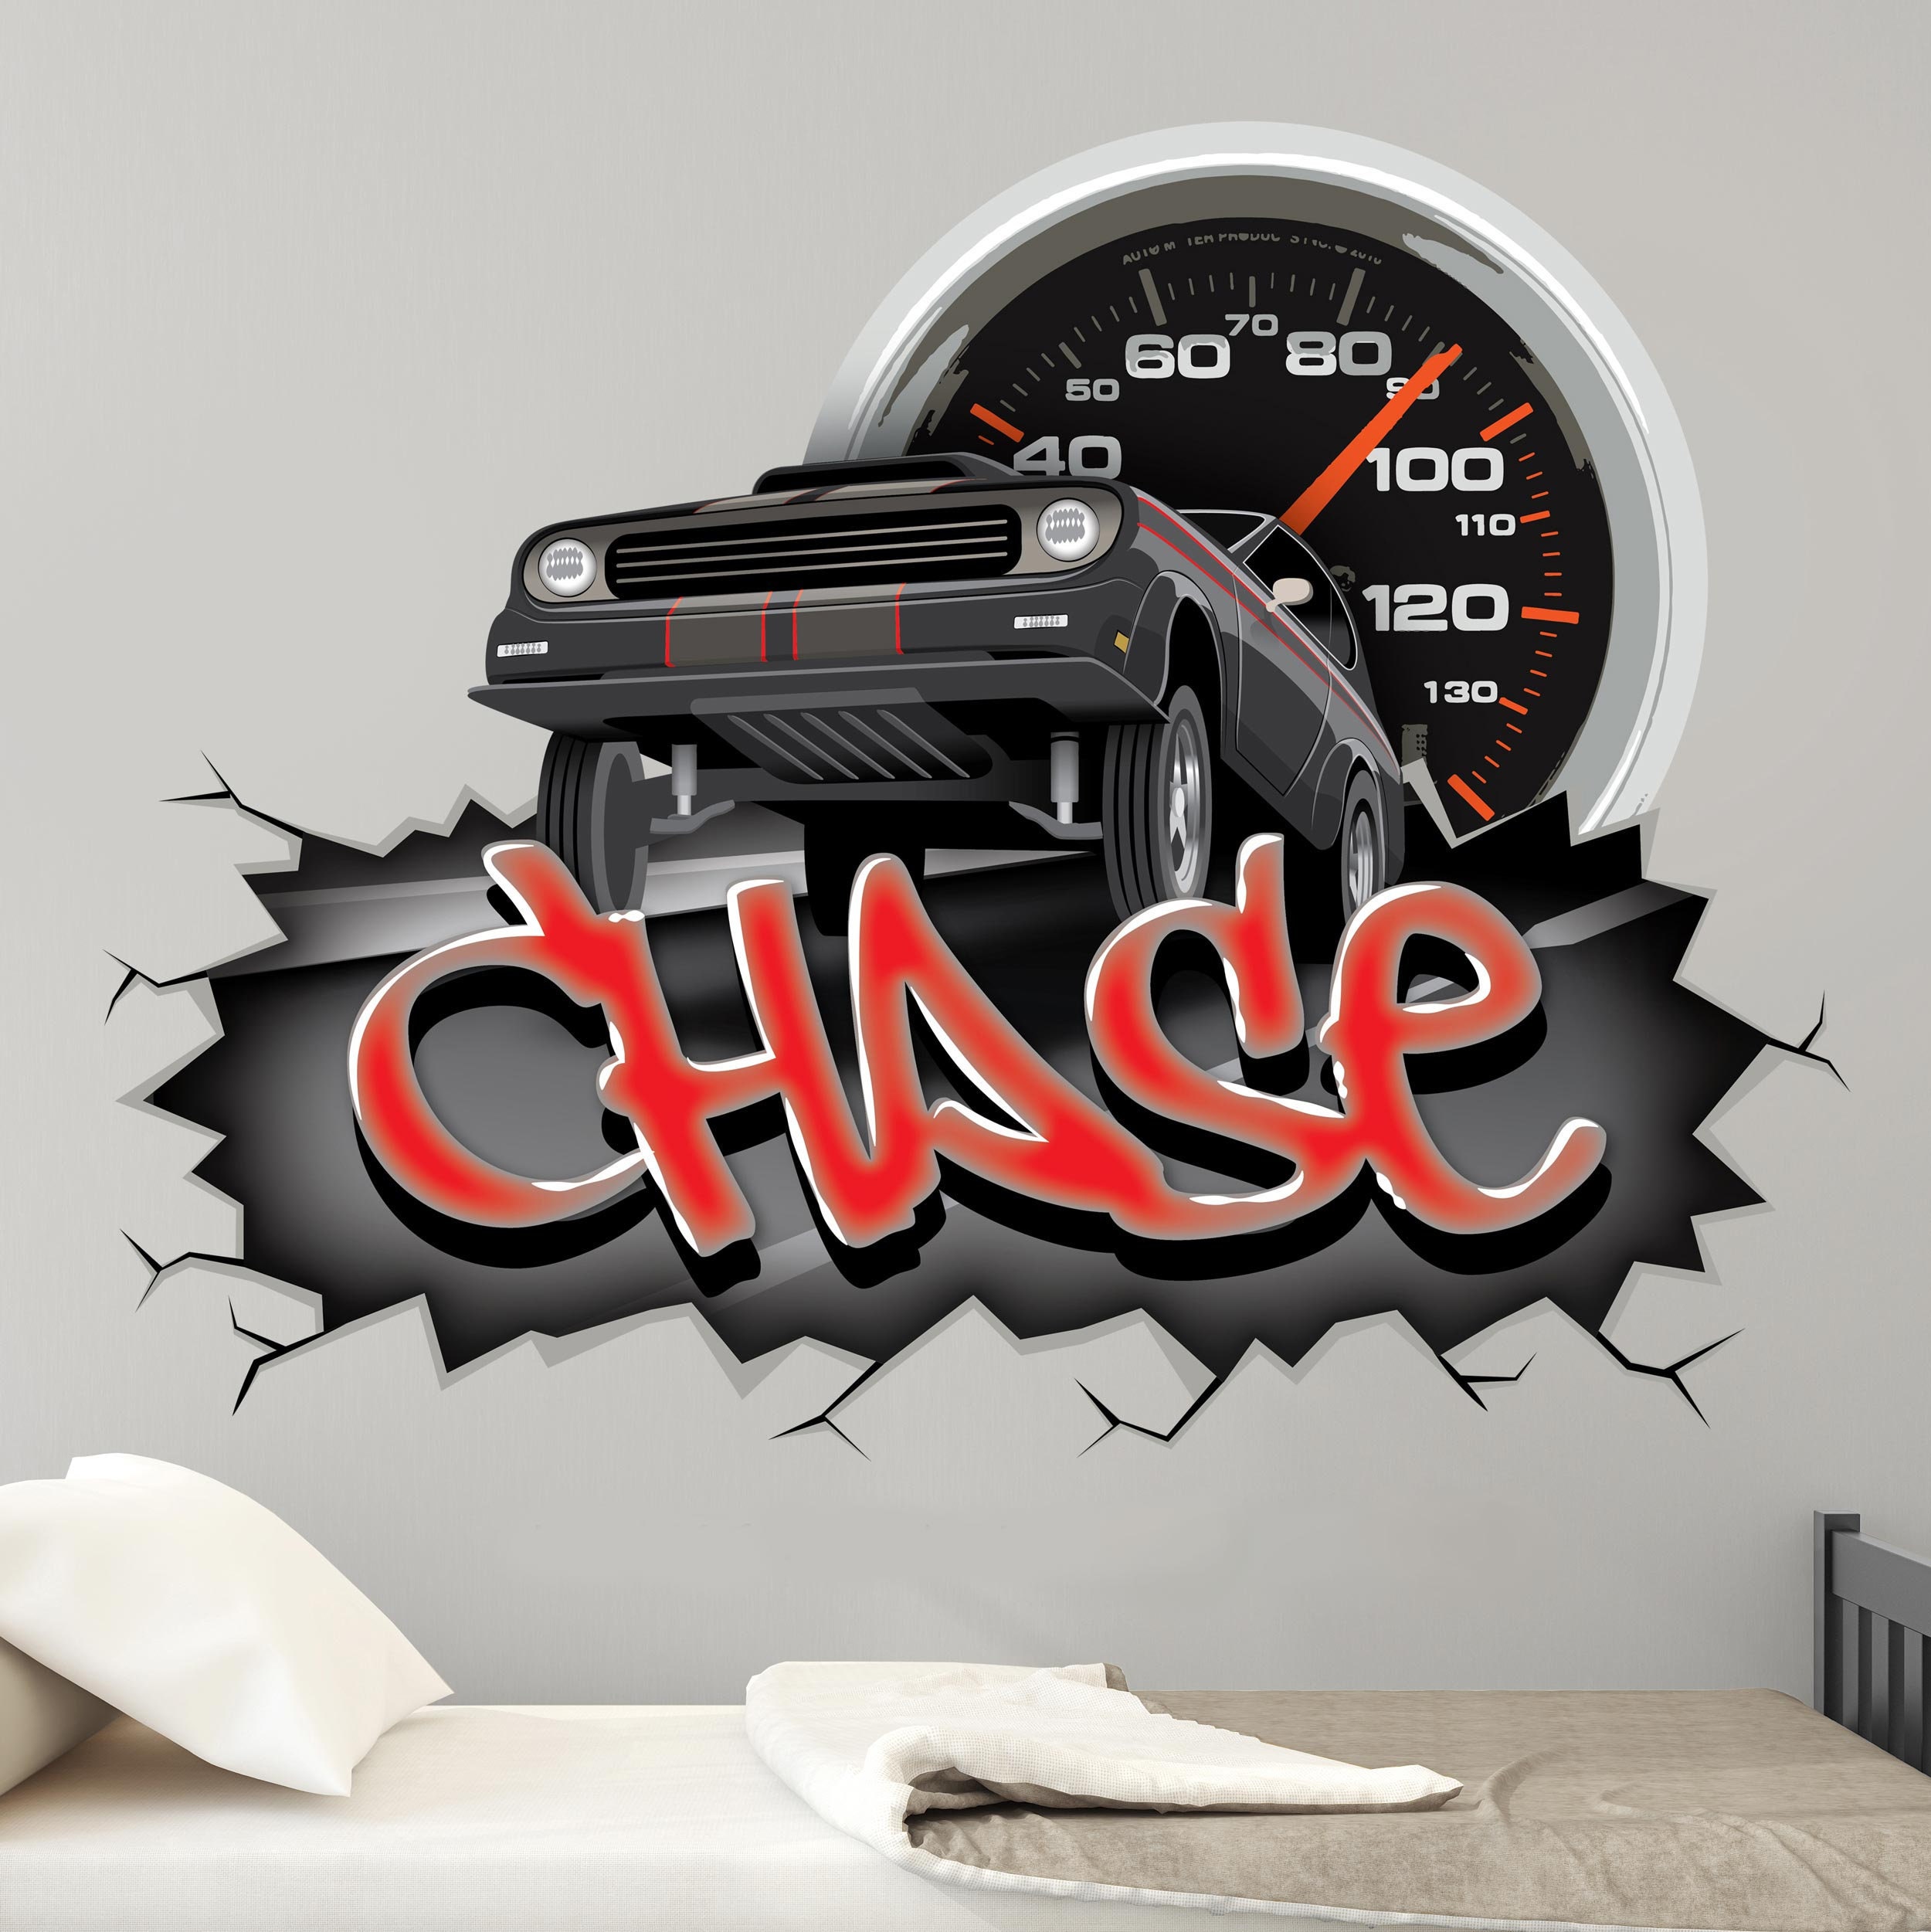 Made in USA. Boys Bedroom NASCAR RACING CAR Quality Removable Wall Stickers